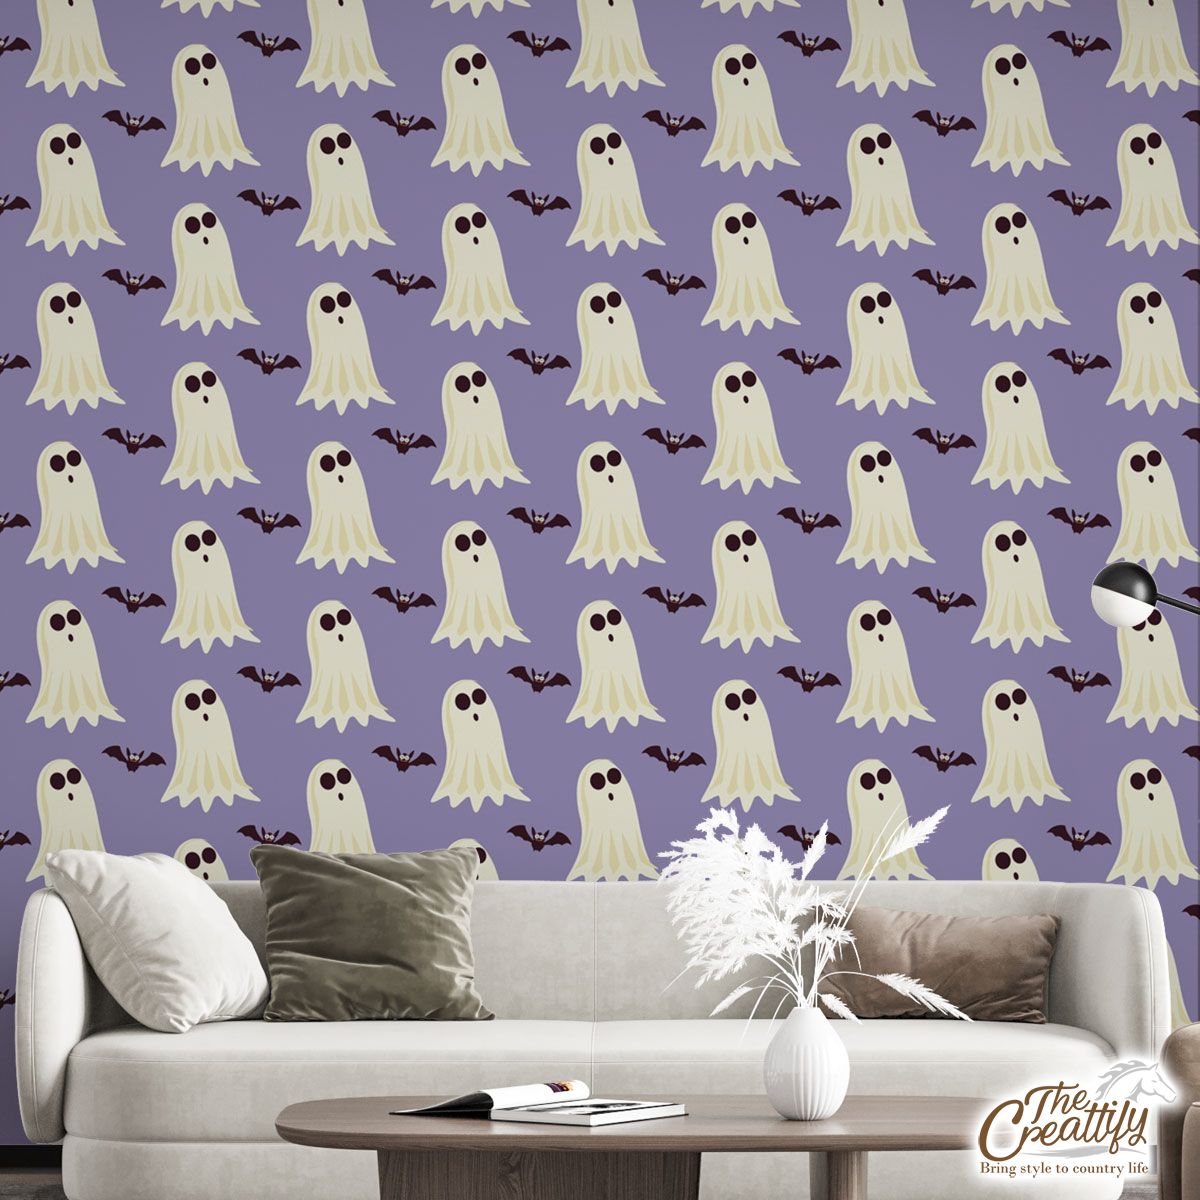 Cute and Funny White Boo Ghost And Bat Halloween Wall Mural